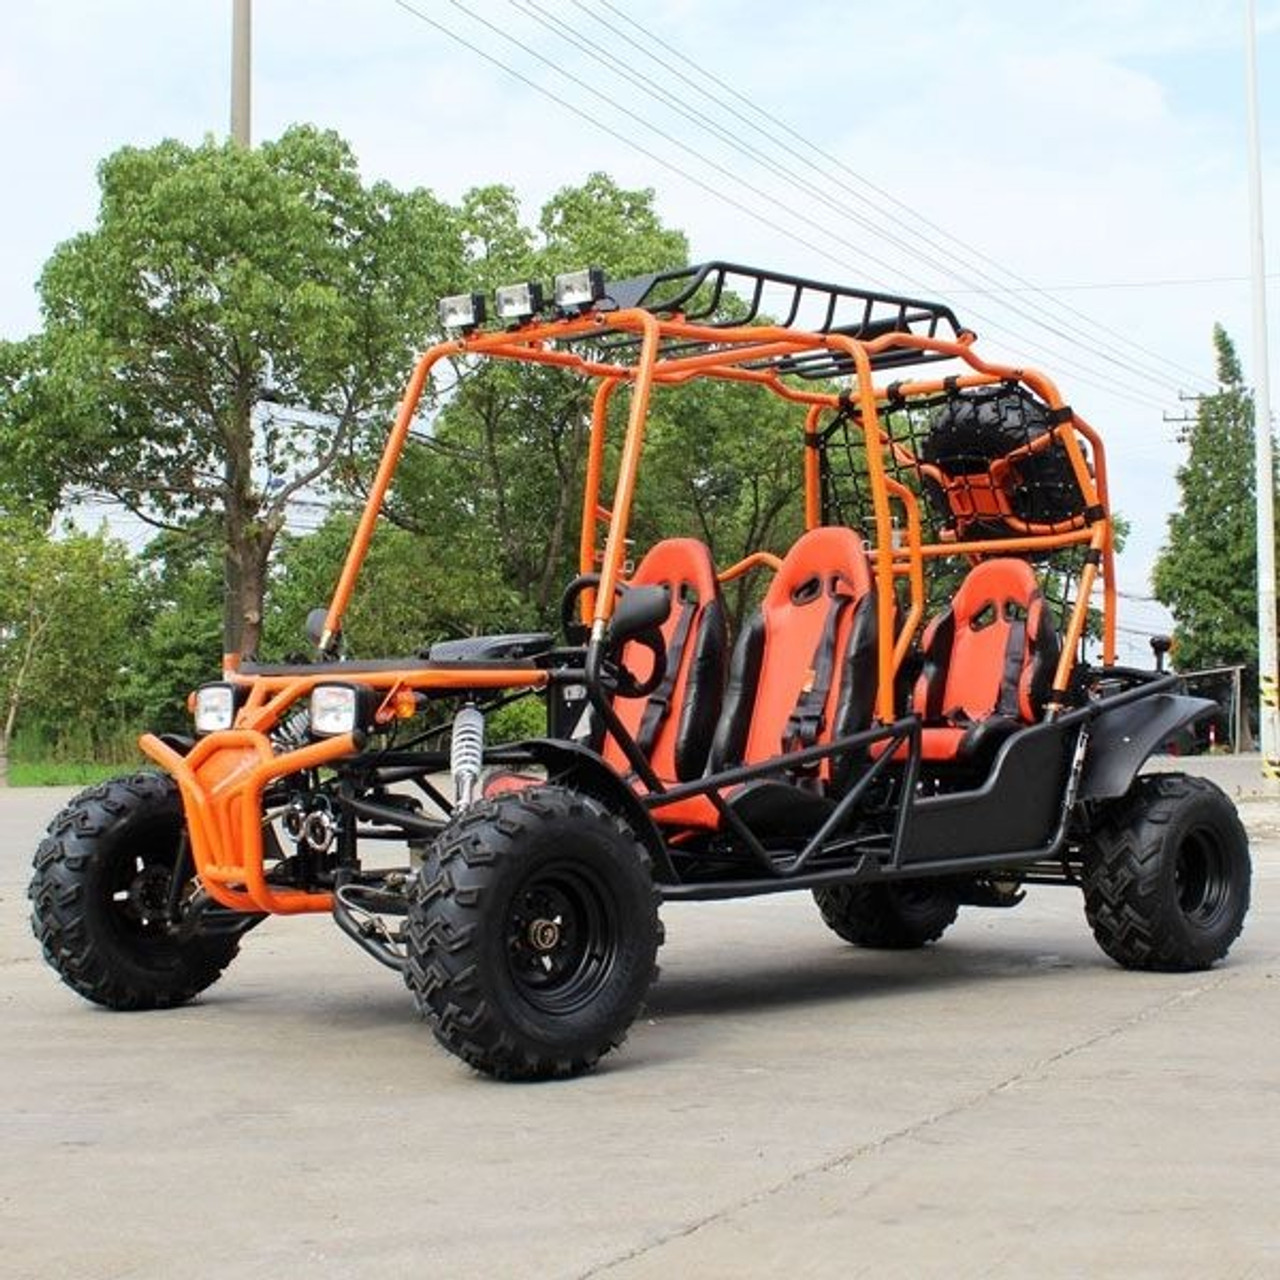 Dongfang 200cc (DF200GHG) Adult Gas Go-Kart, 4 Seater DF GHG With Auto & Reverse Gear - Orange